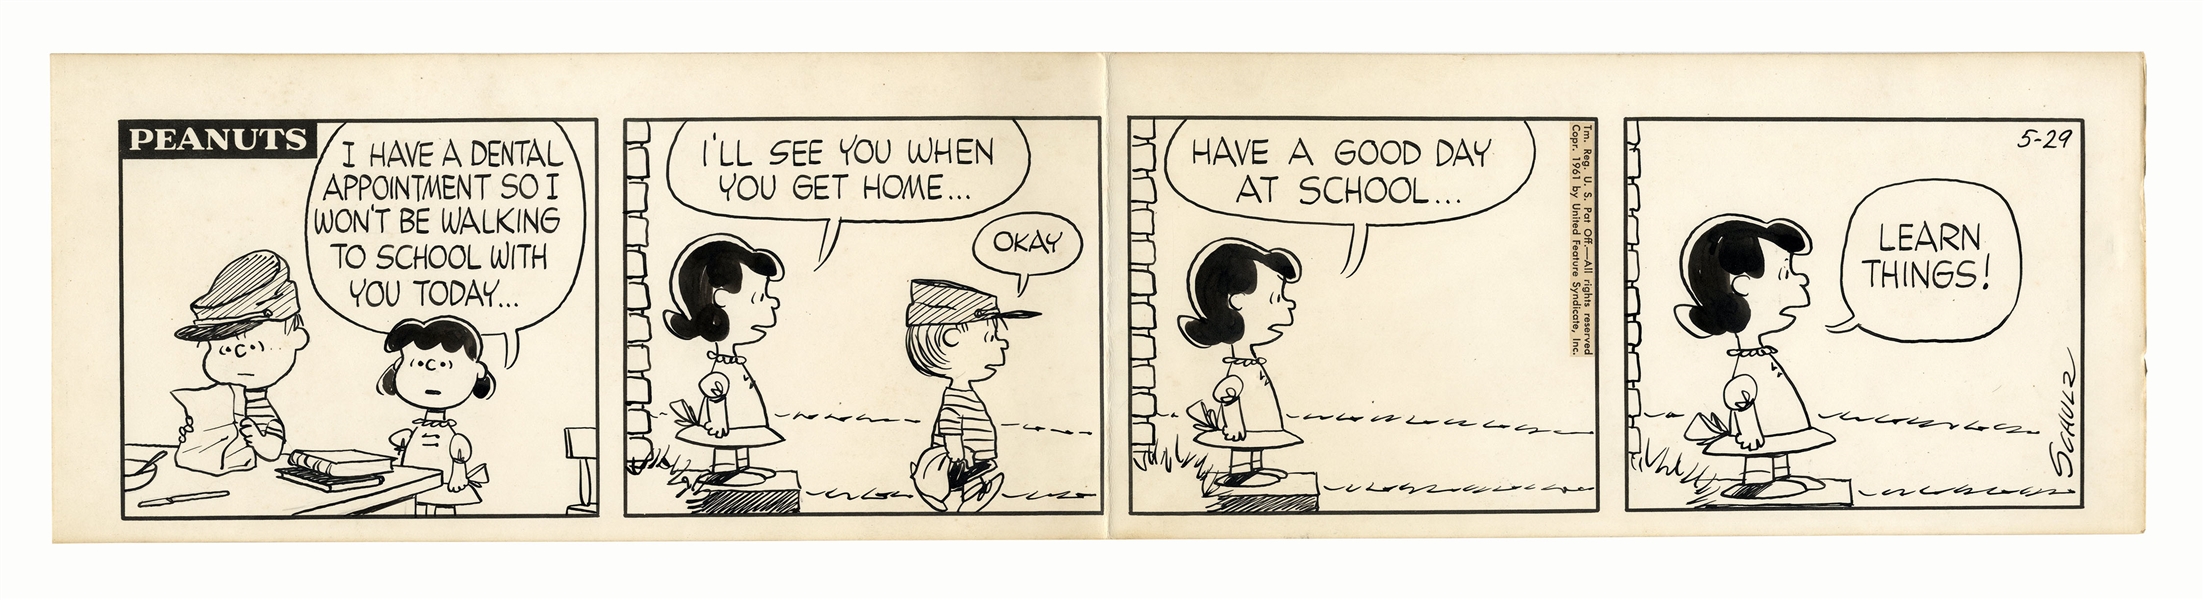 Charles Schulz Hand-Drawn Comic Strip From October 1961 -- Lucy Tells Her Brother Linus to ''LEARN THINGS!'' as He Leaves for School